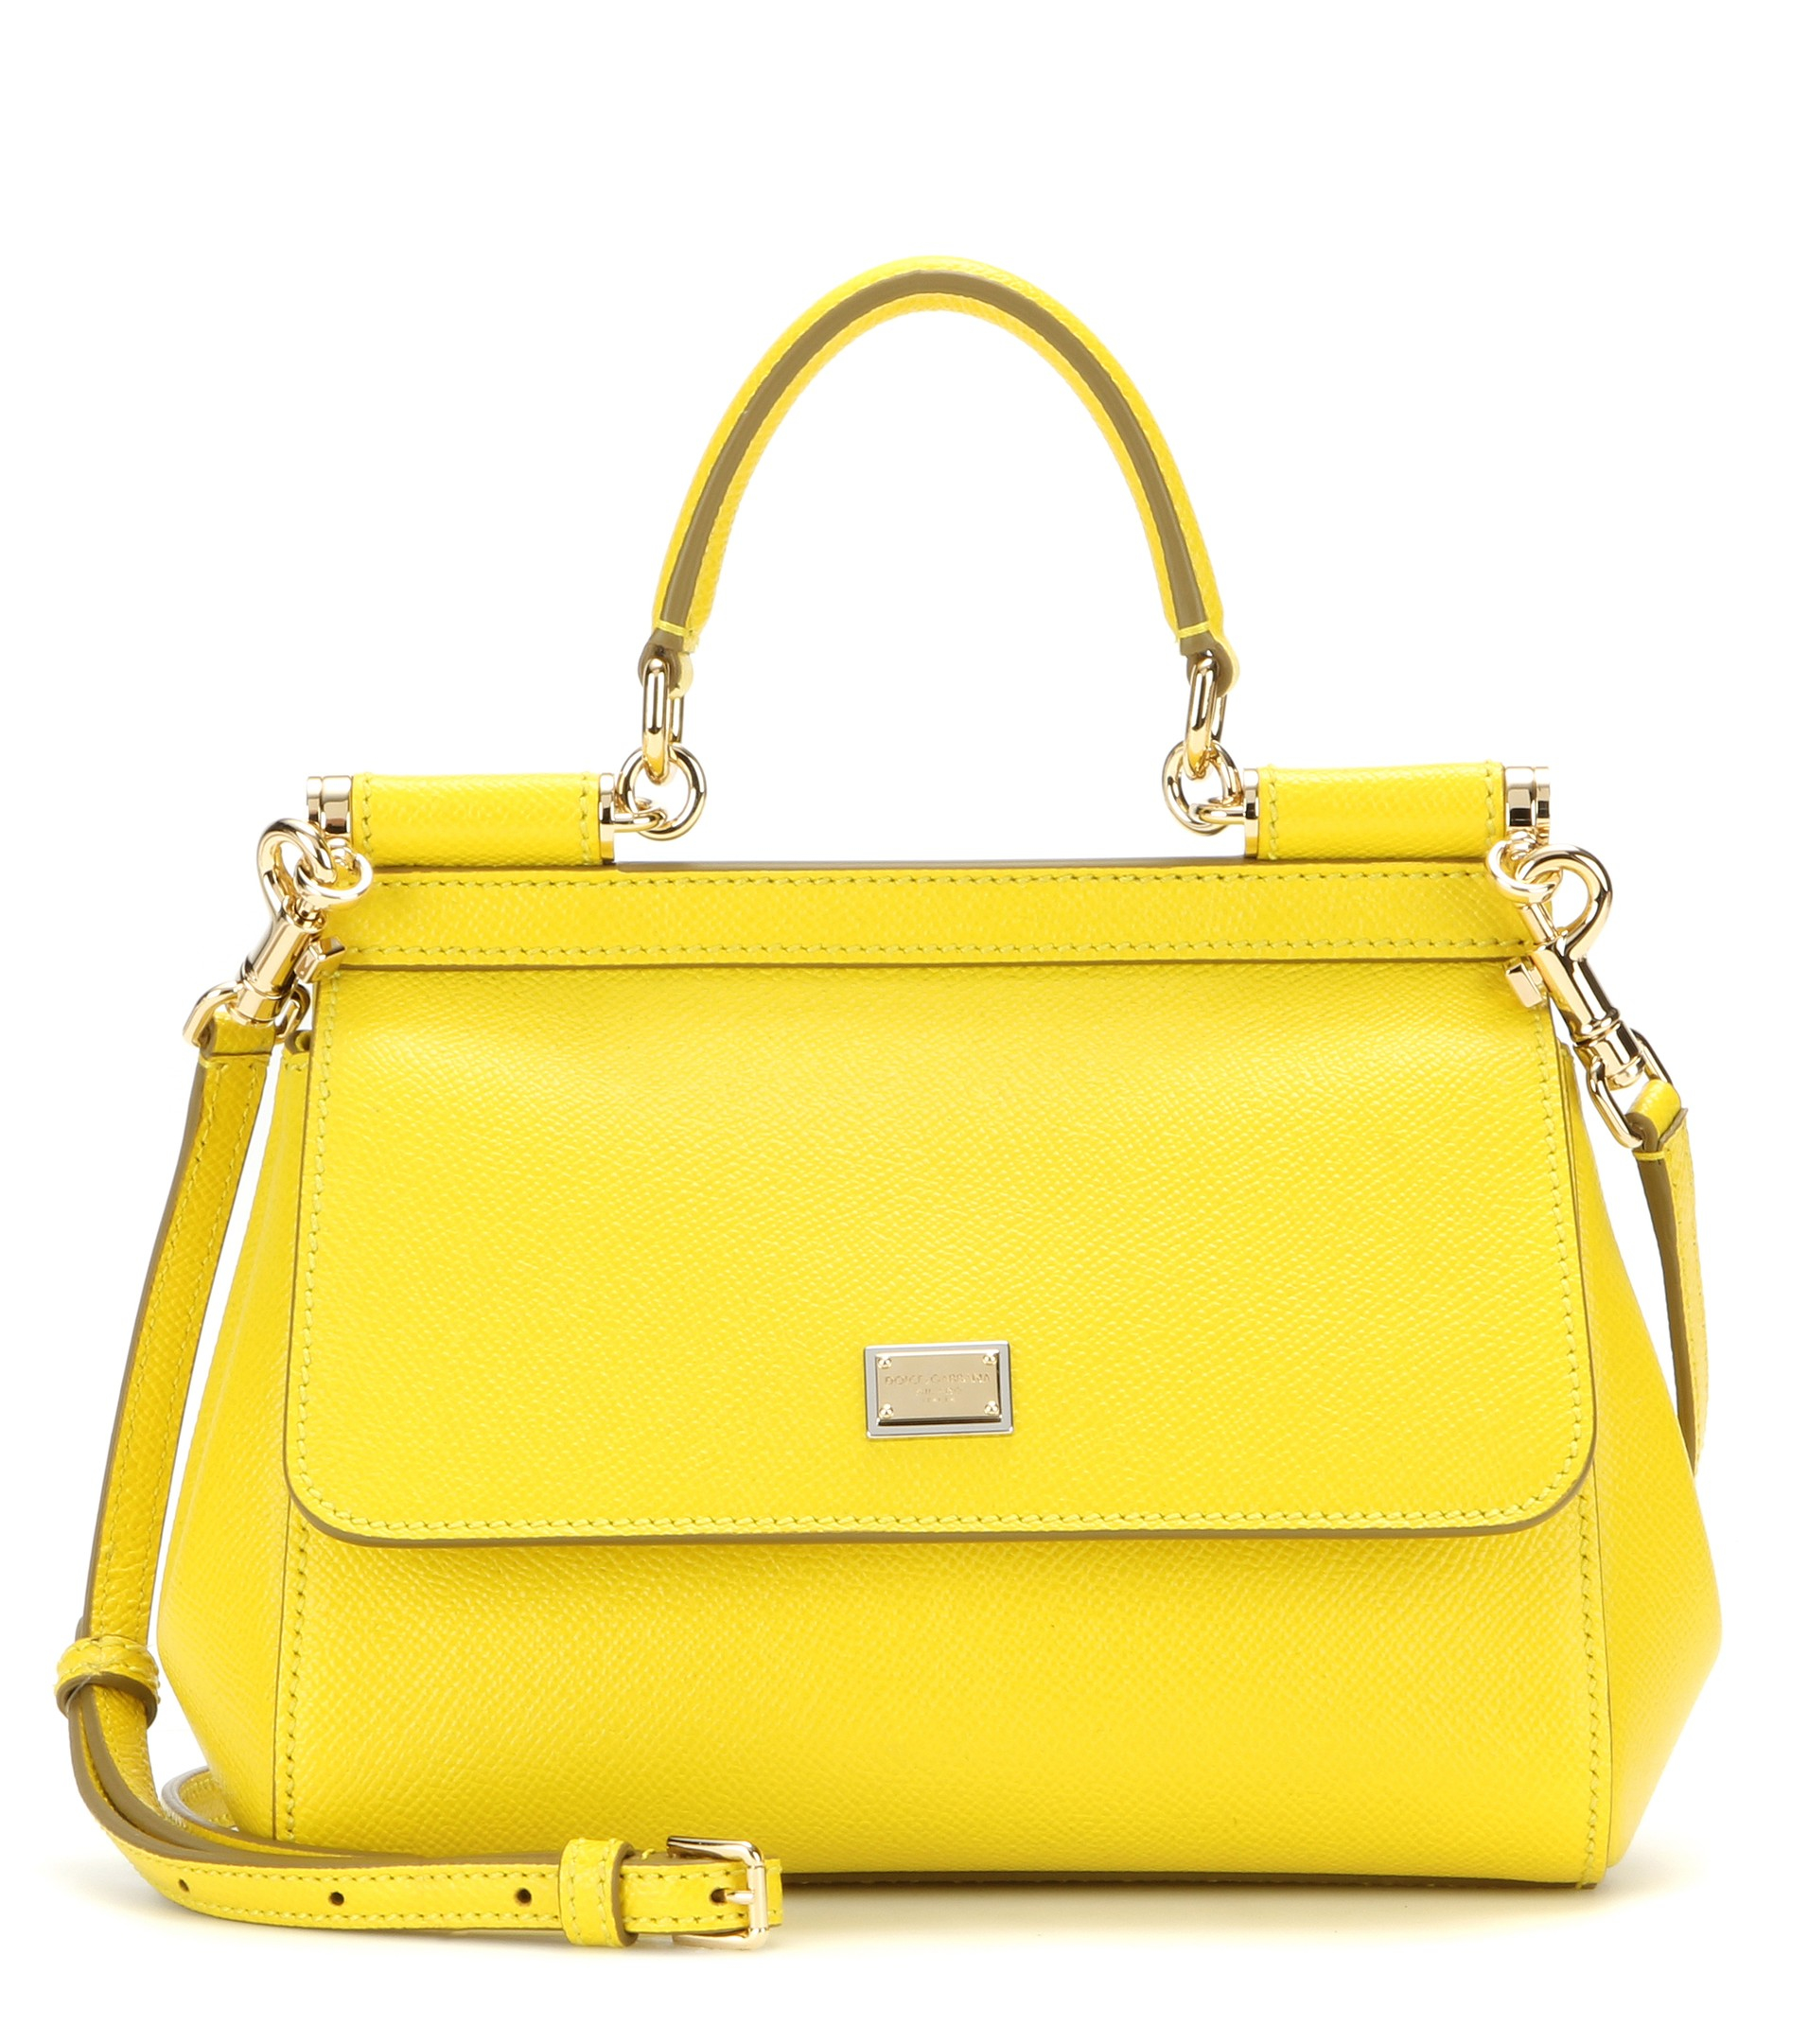 Lyst - Dolce & Gabbana Miss Sicily Leather Shoulder Bag in Yellow